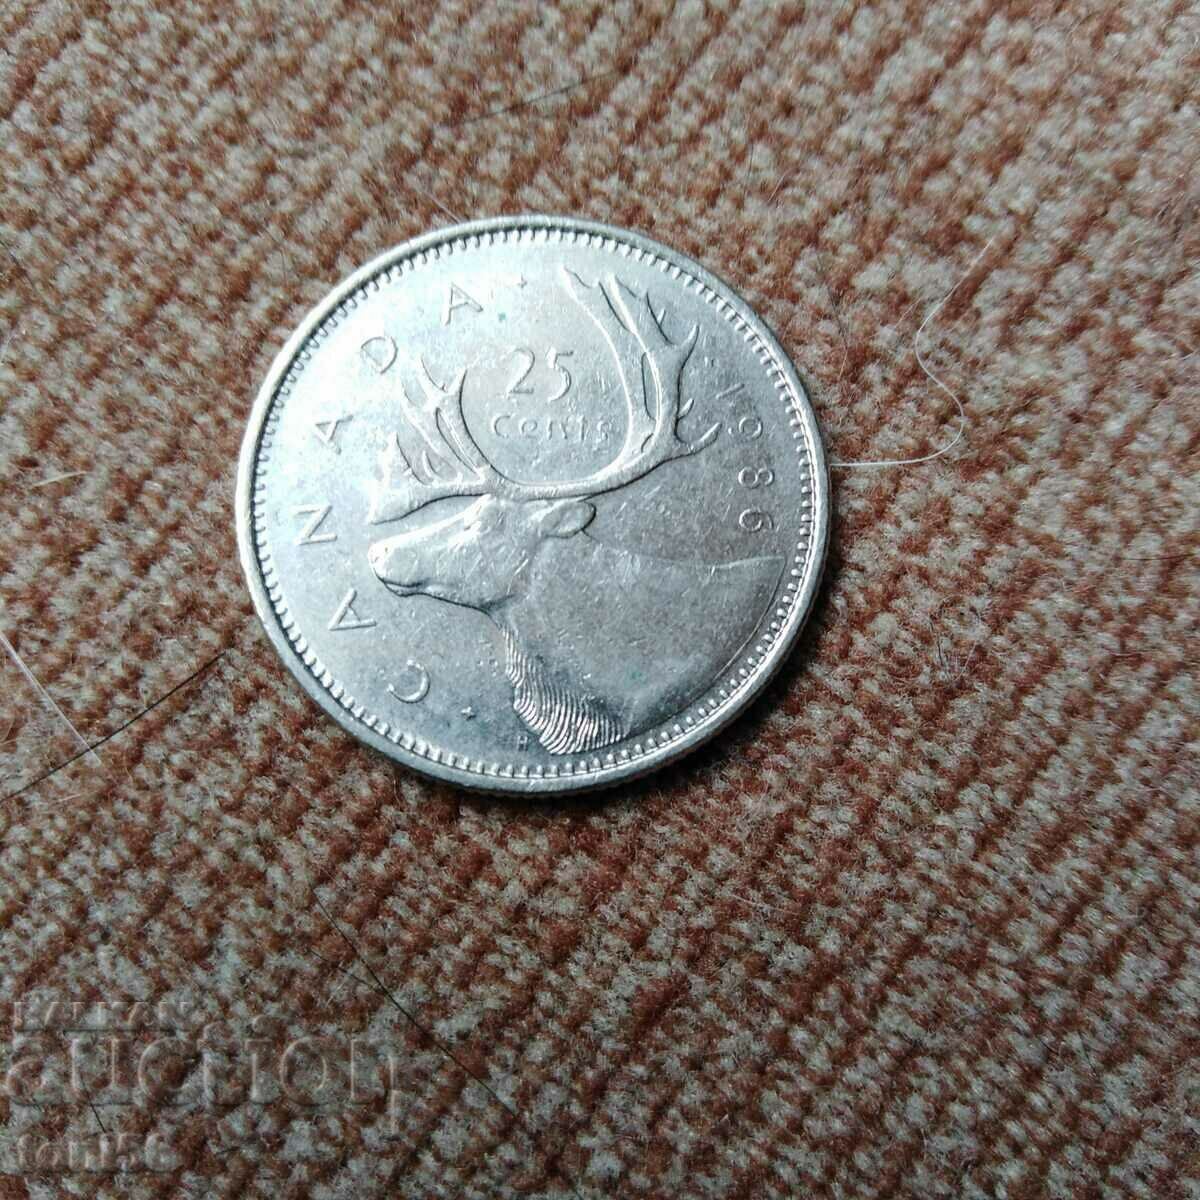 Canada 25 cents 1986